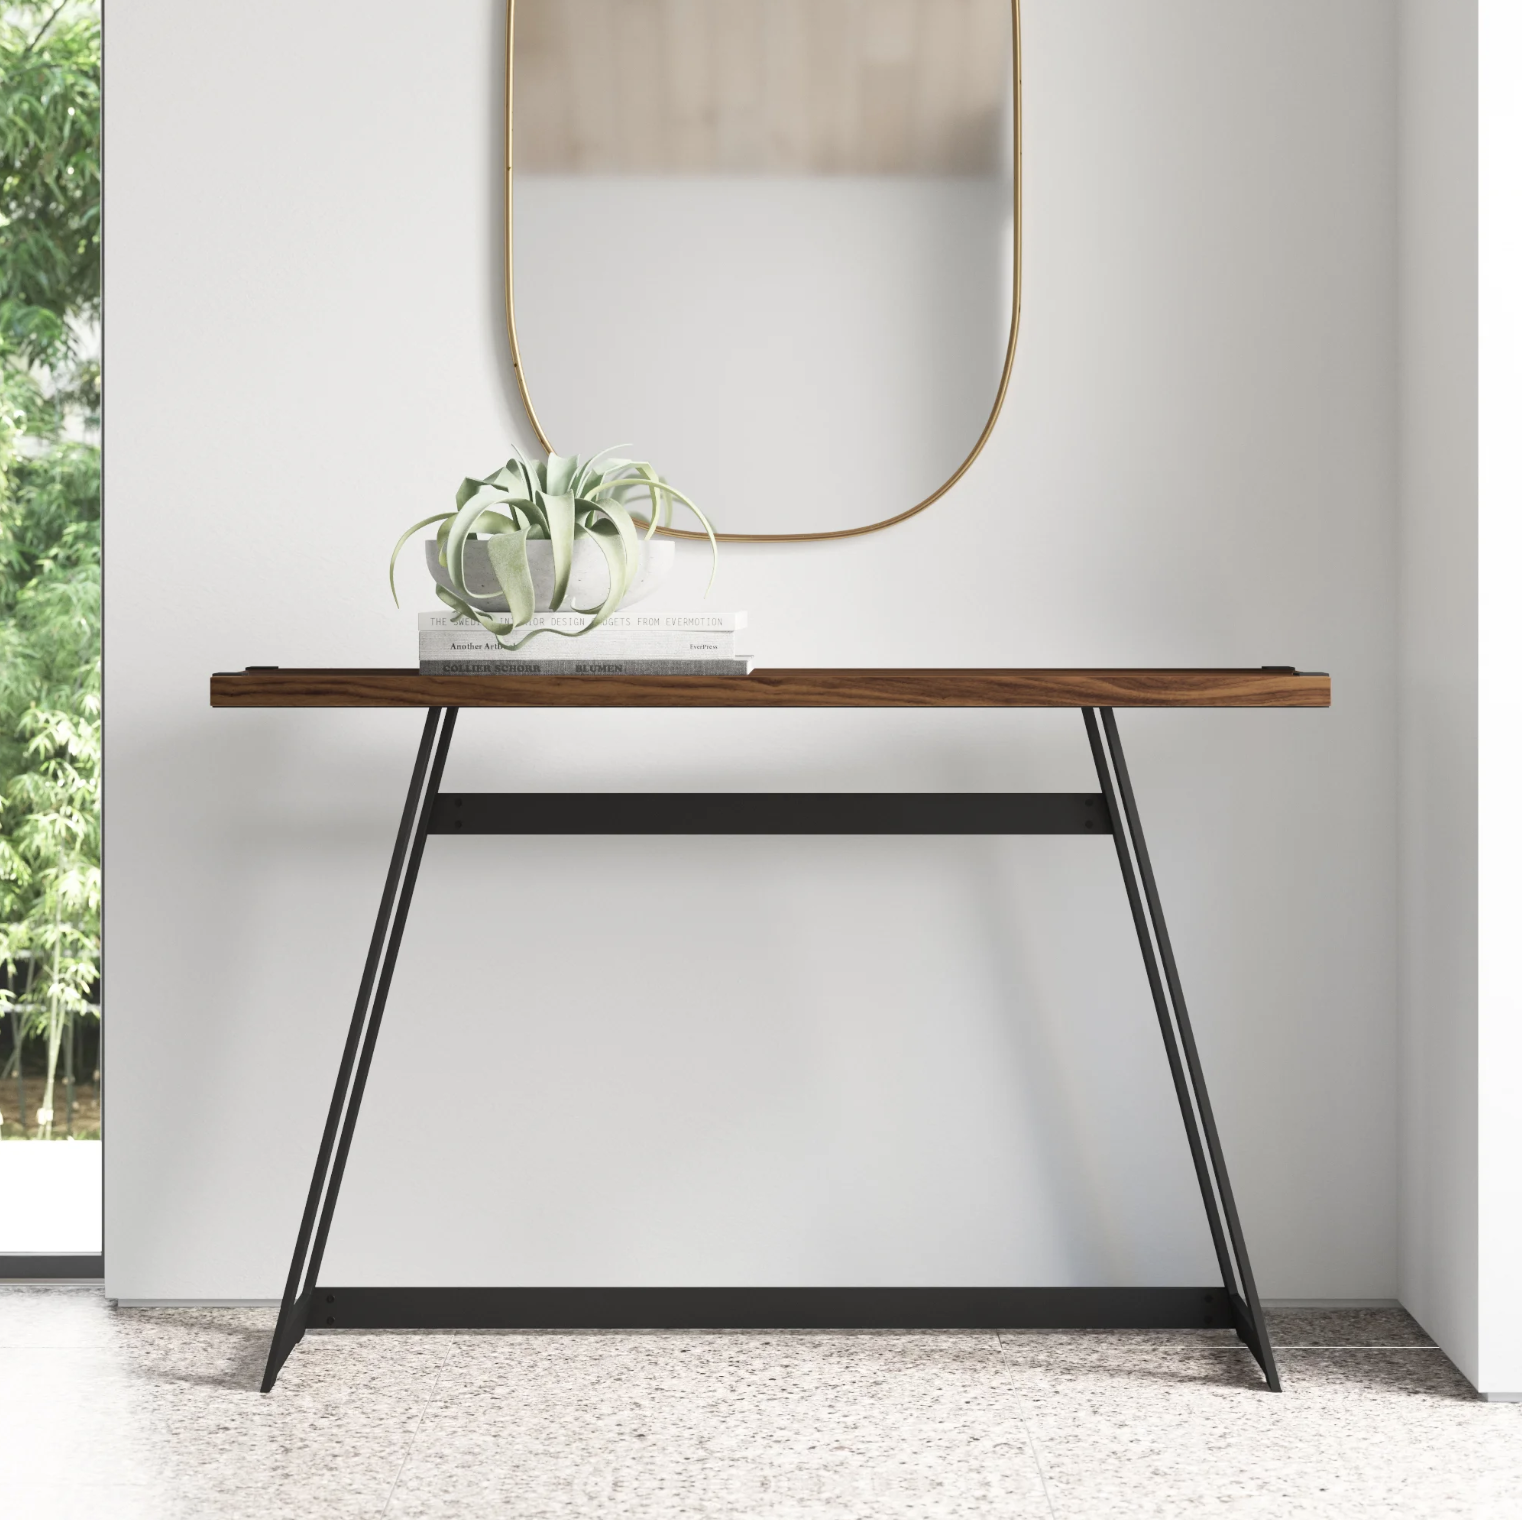 The console table with a mirror hung above it